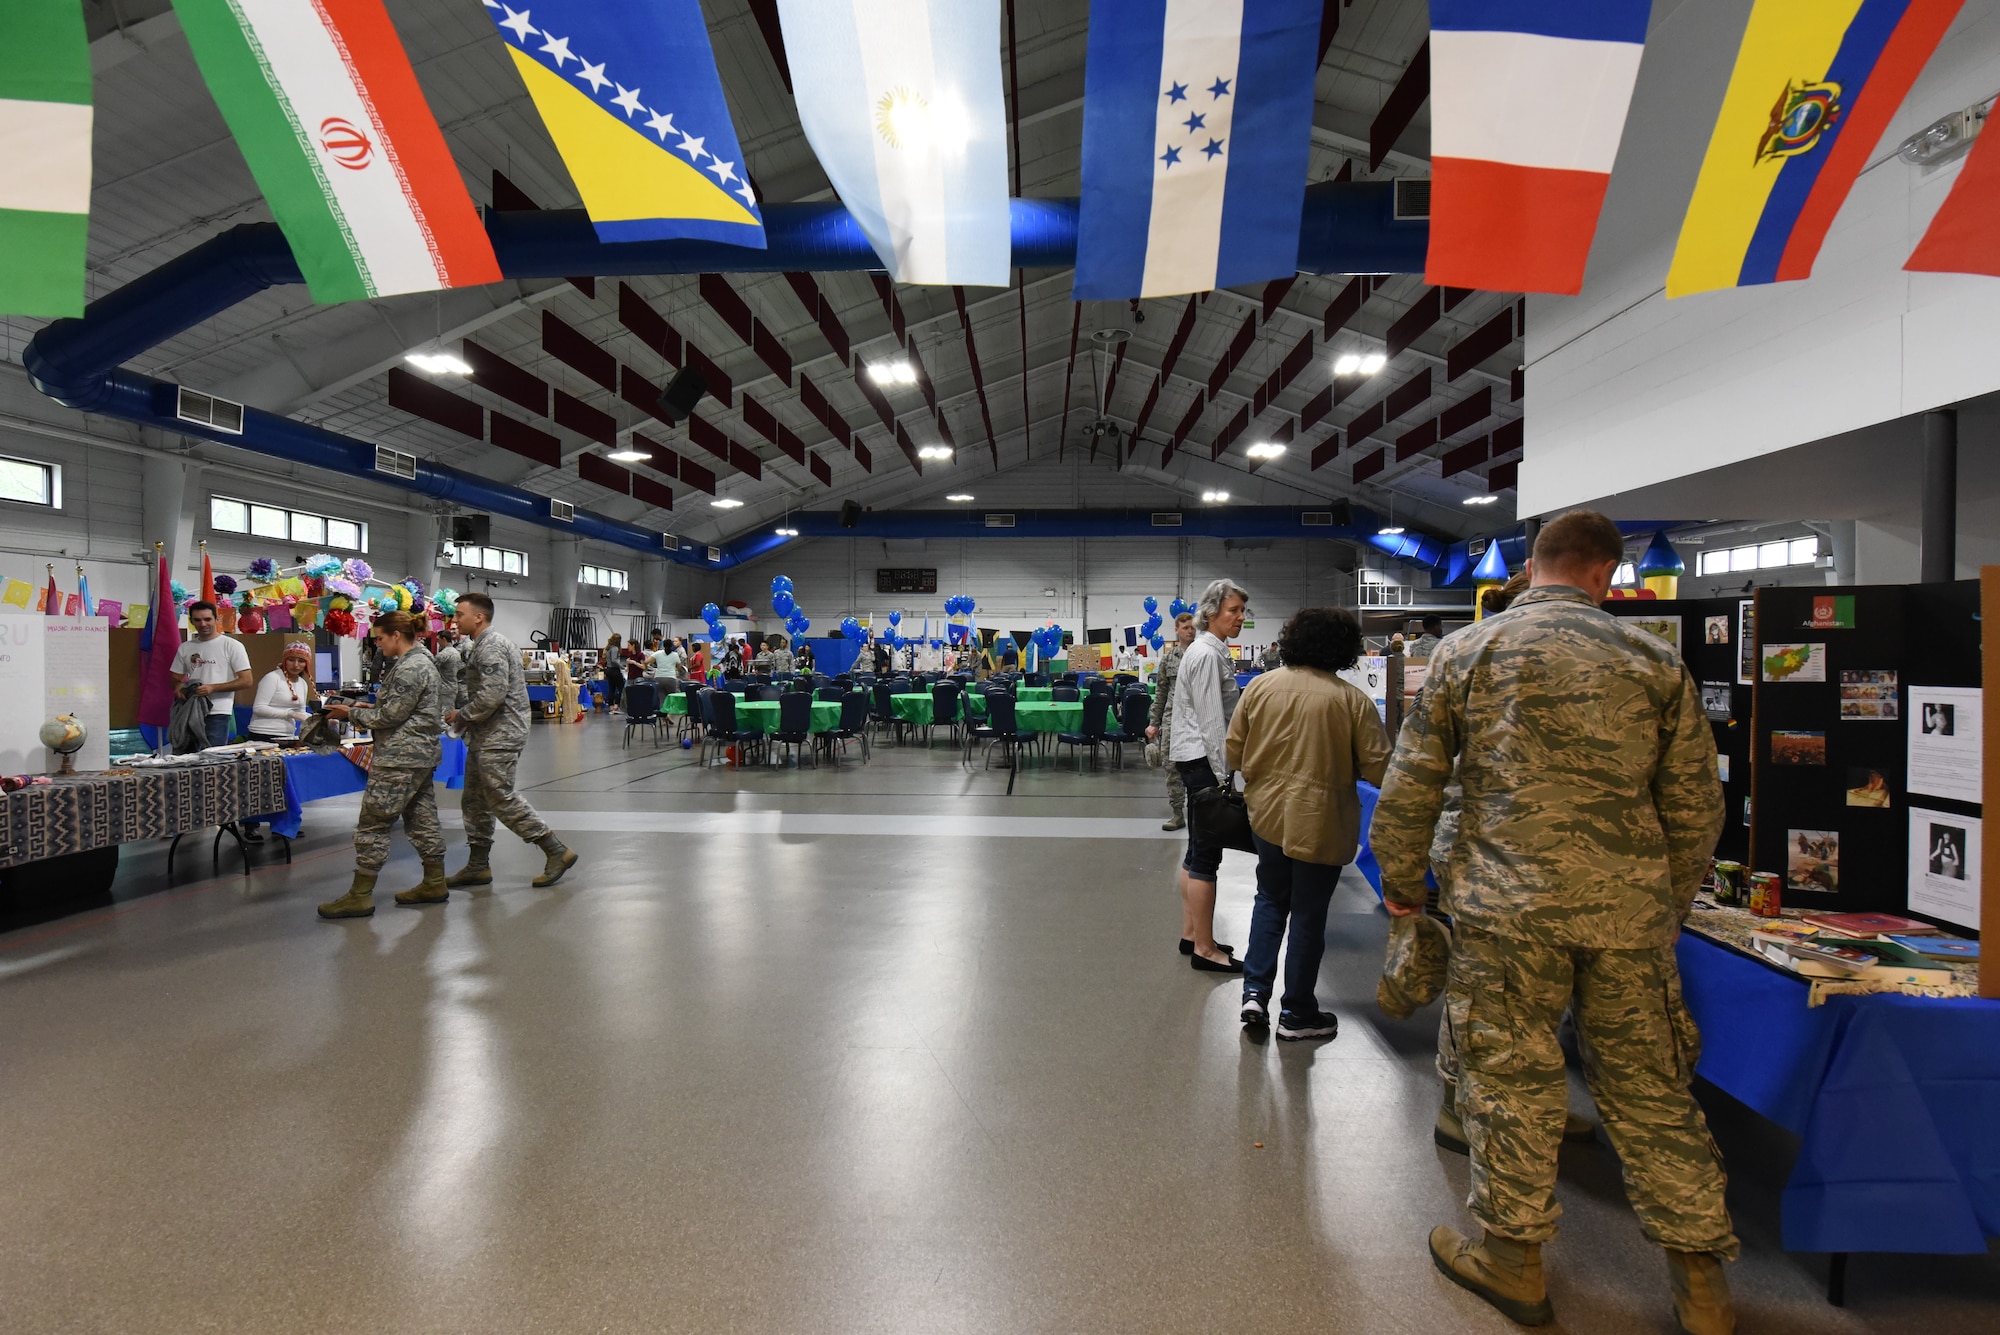 Base residents explore the many cultures displayed at the multicultural expo June 20, 2018, at Grand Forks Air Force Base, North Dakota. The event consisted of booths that were decorated and themed toward the many cultures around the world, along with food samples and fun facts. (U.S. Air Force photo by Airman 1st Class Melody Wolff)